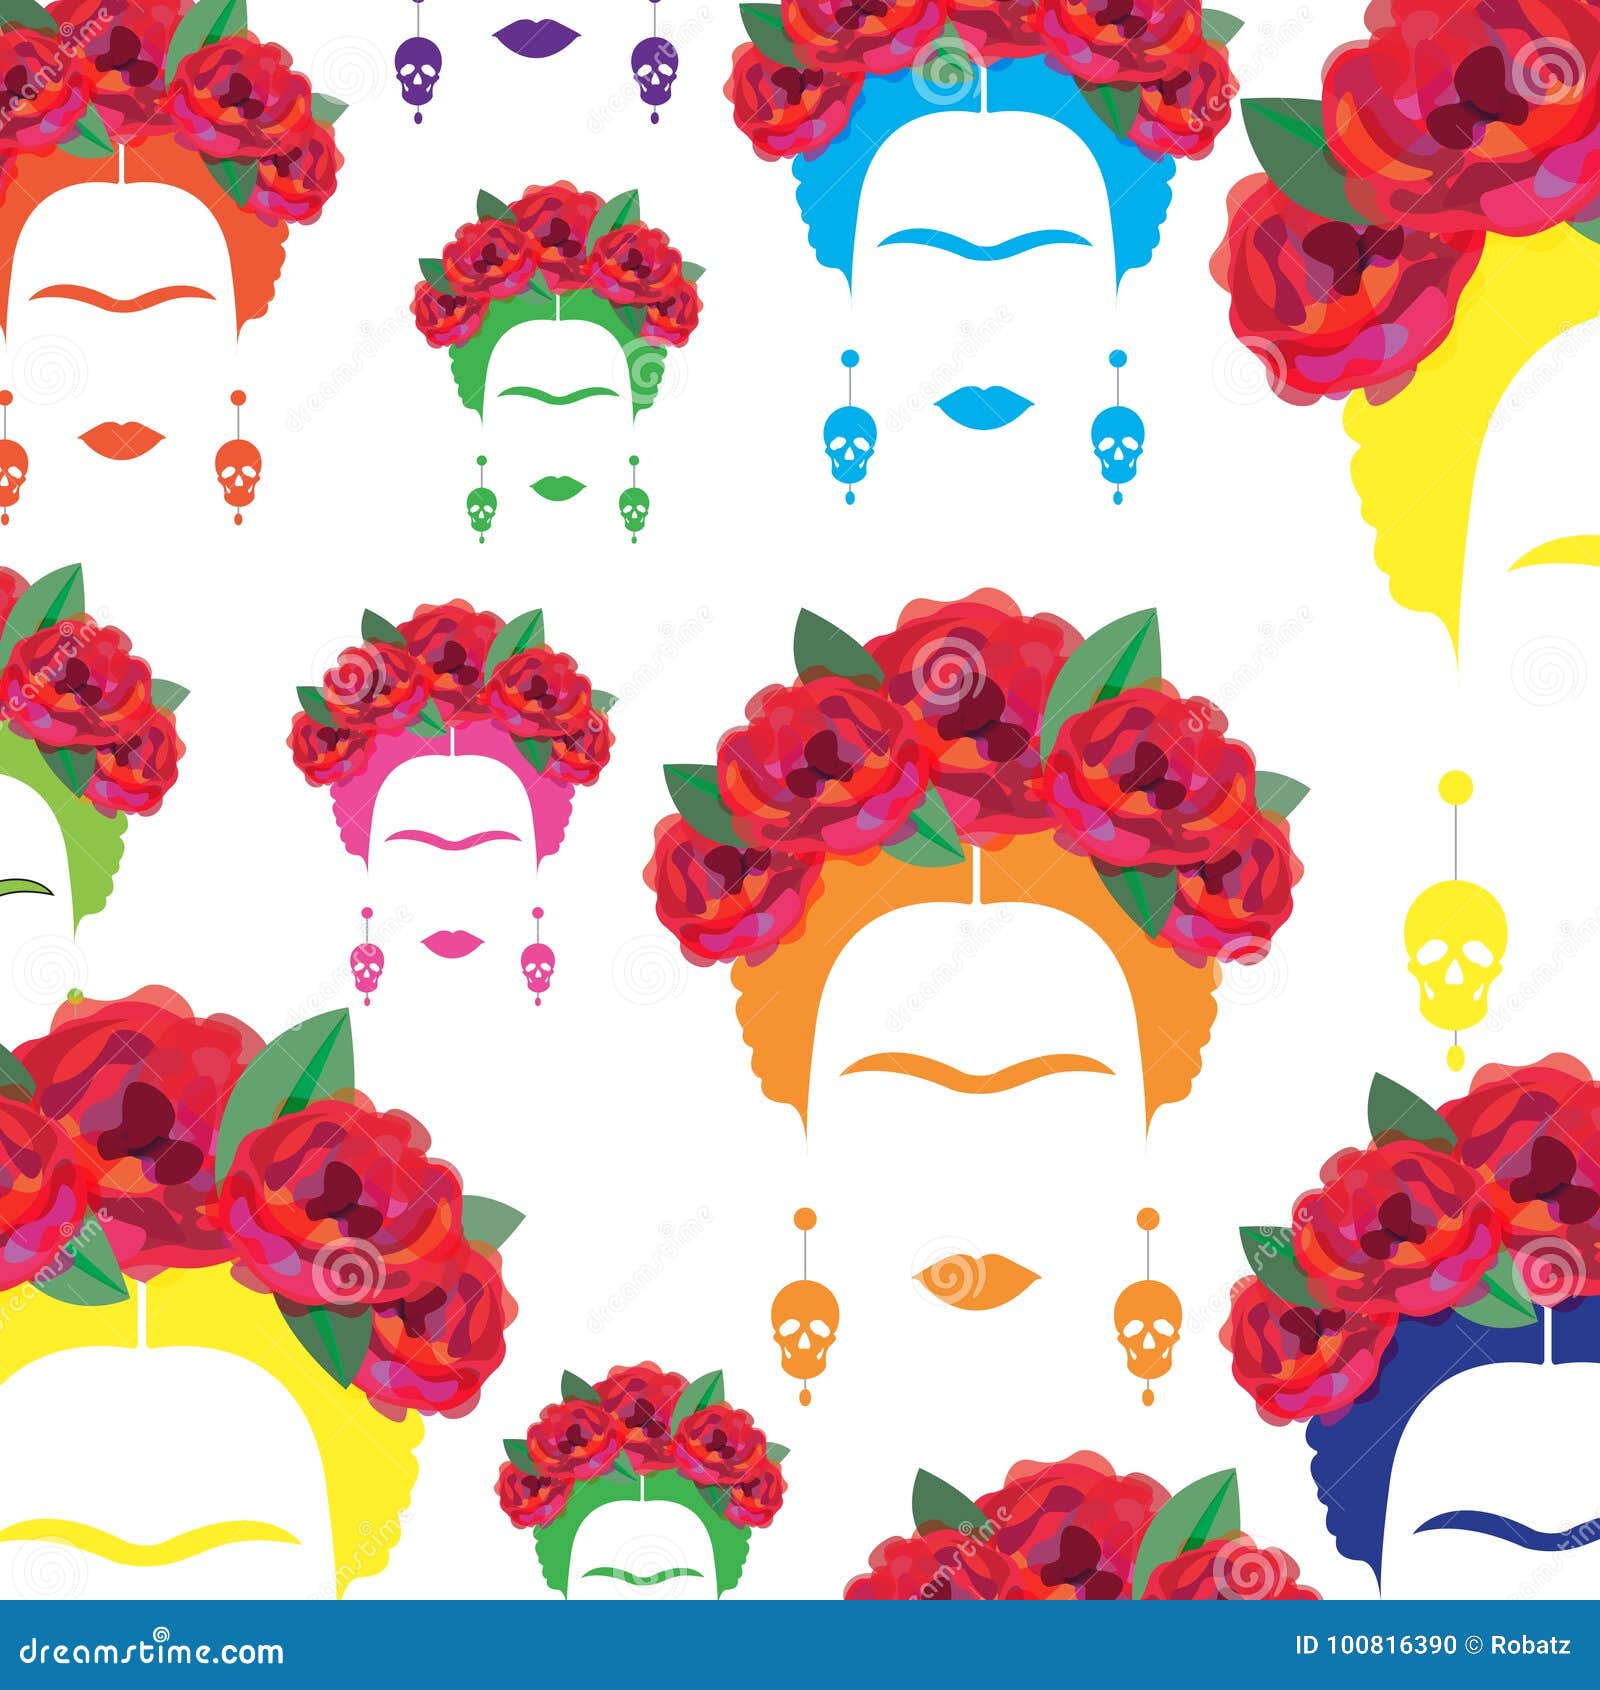 background colorful portrait of mexican or spanish woman, minimalist frida kahlo with earrings skulls,